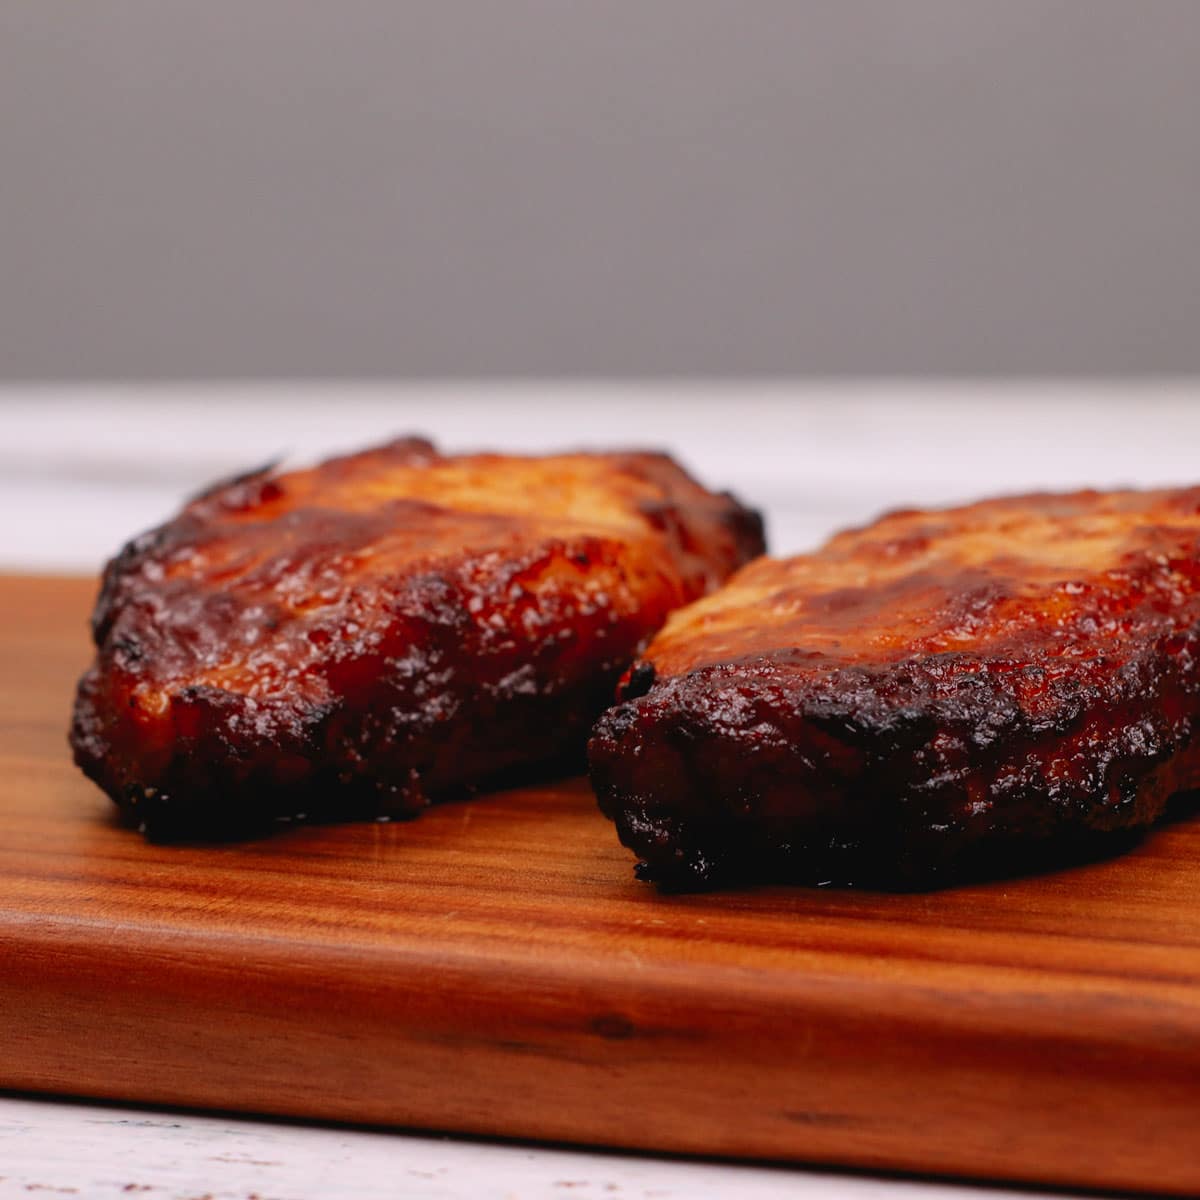 Cooked barbecue flavored pork chops resting on a chopping board.